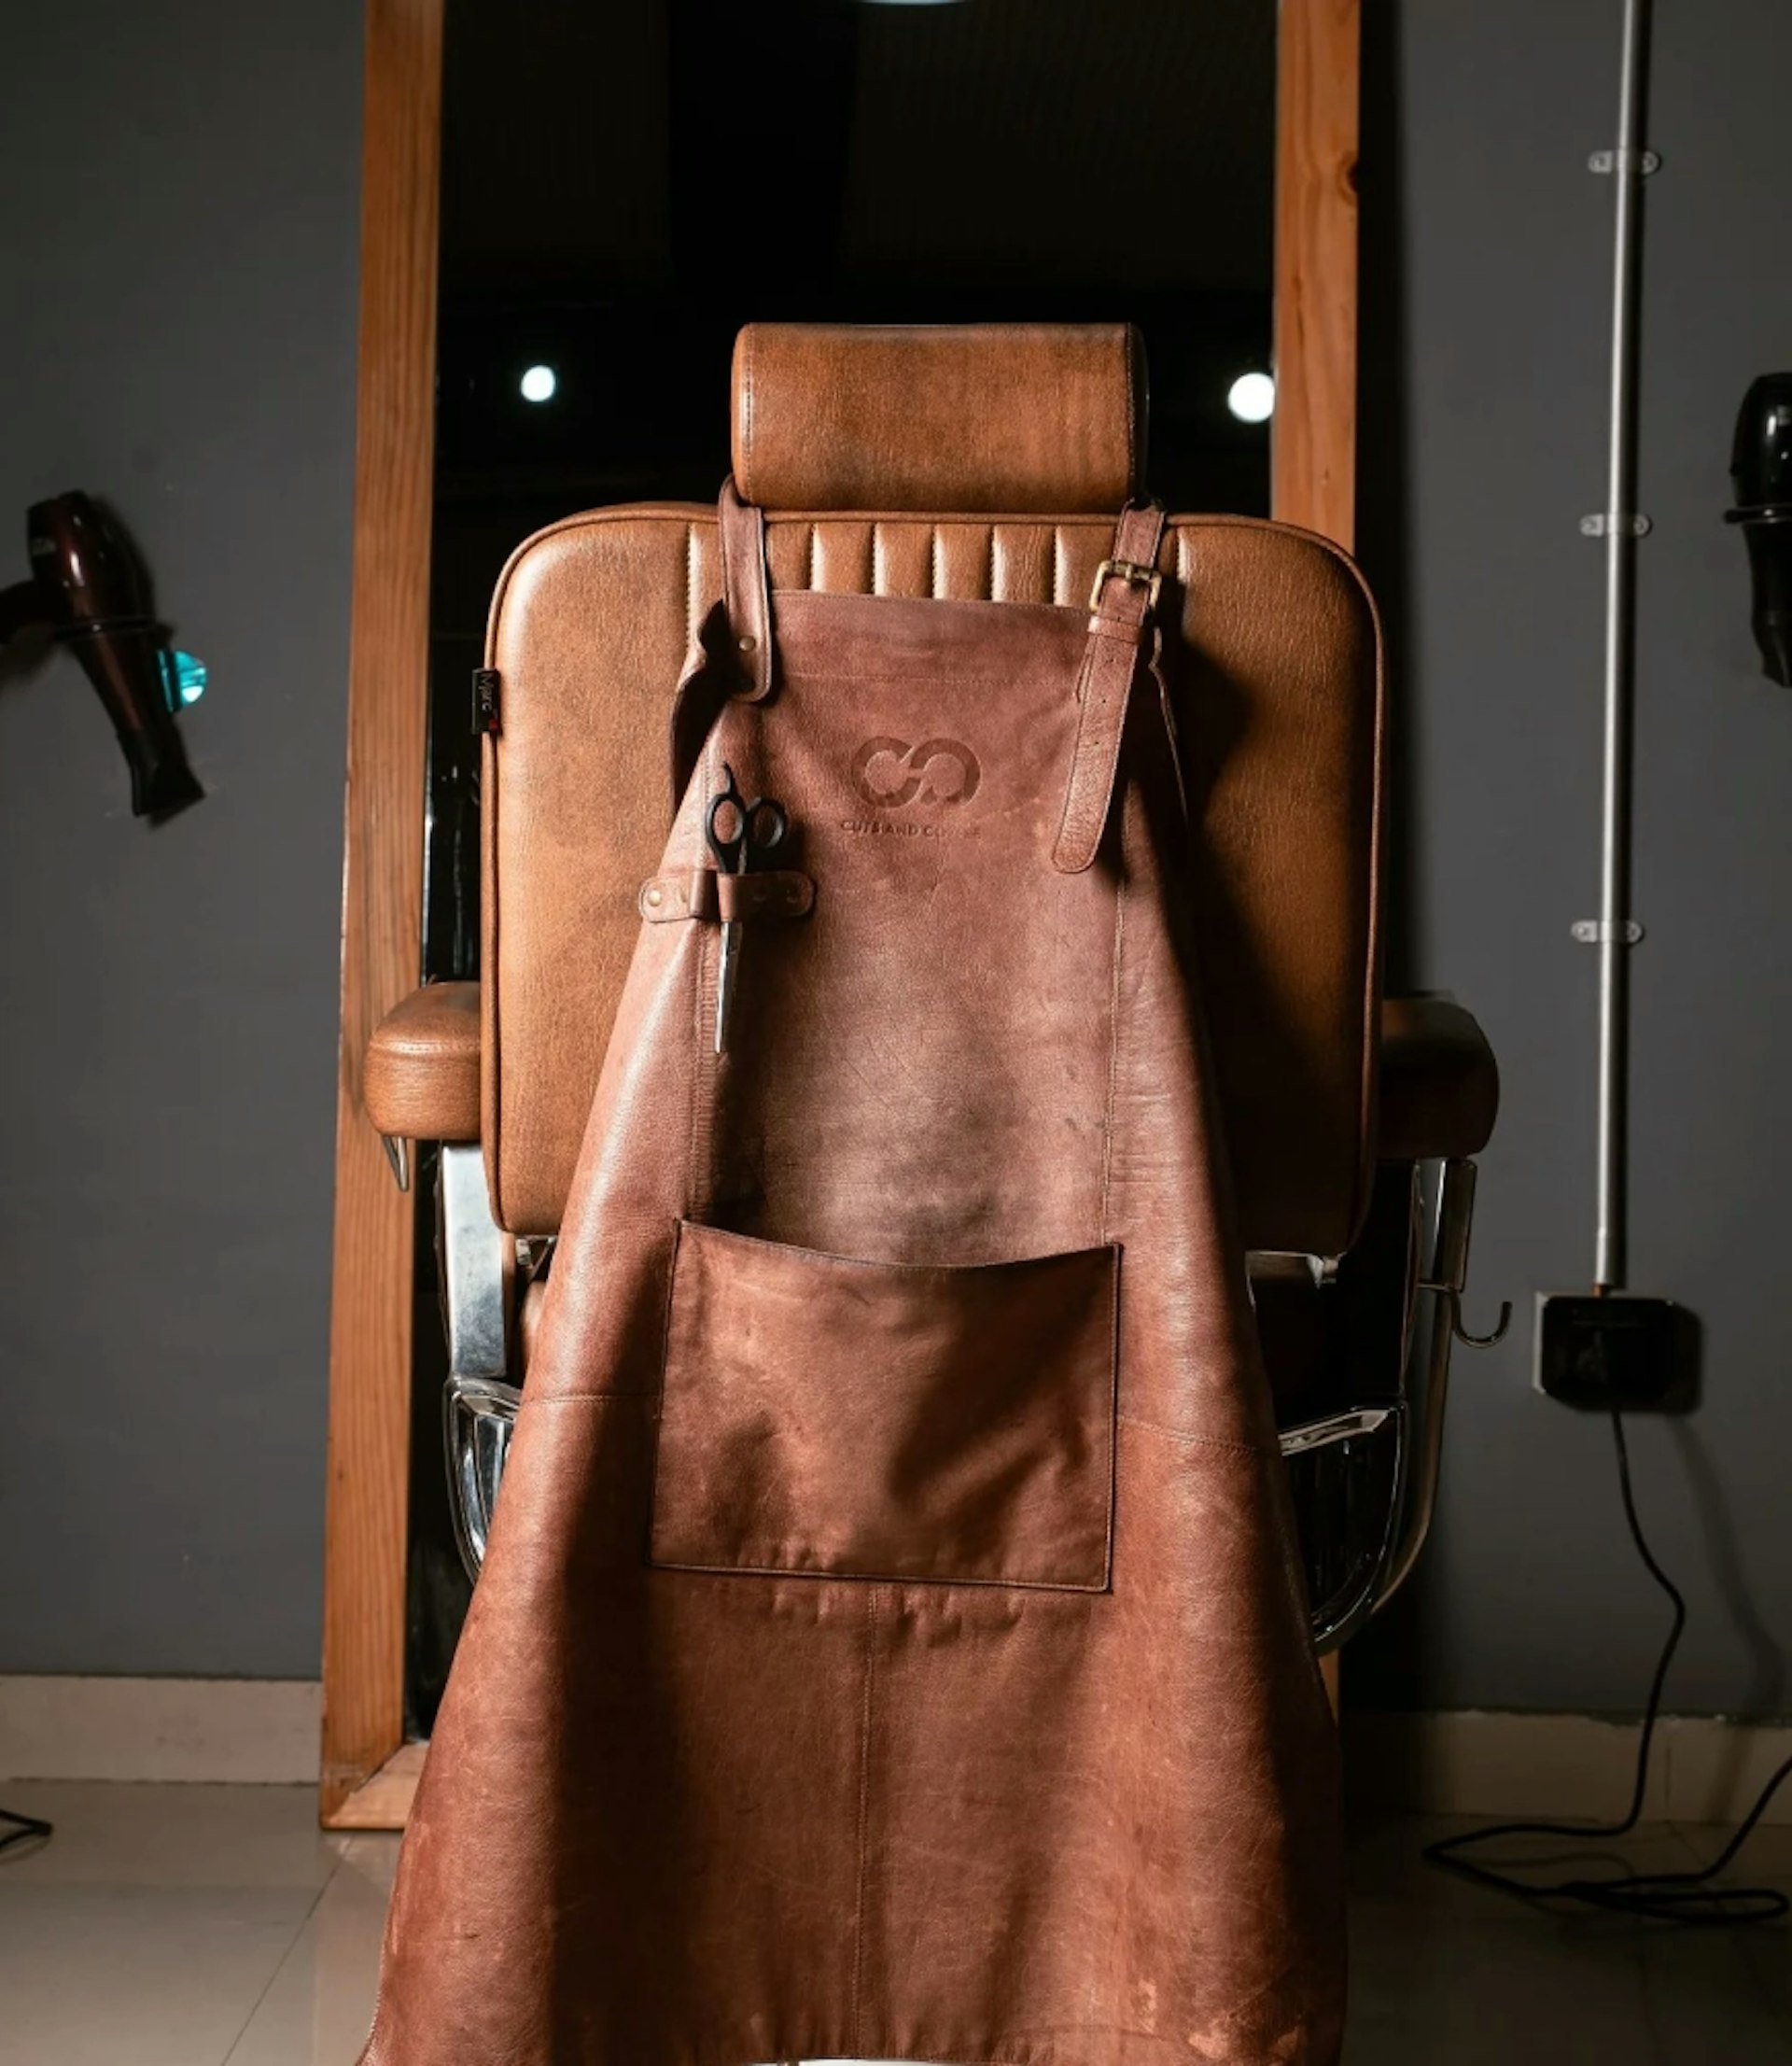 An apron hanged on a chair